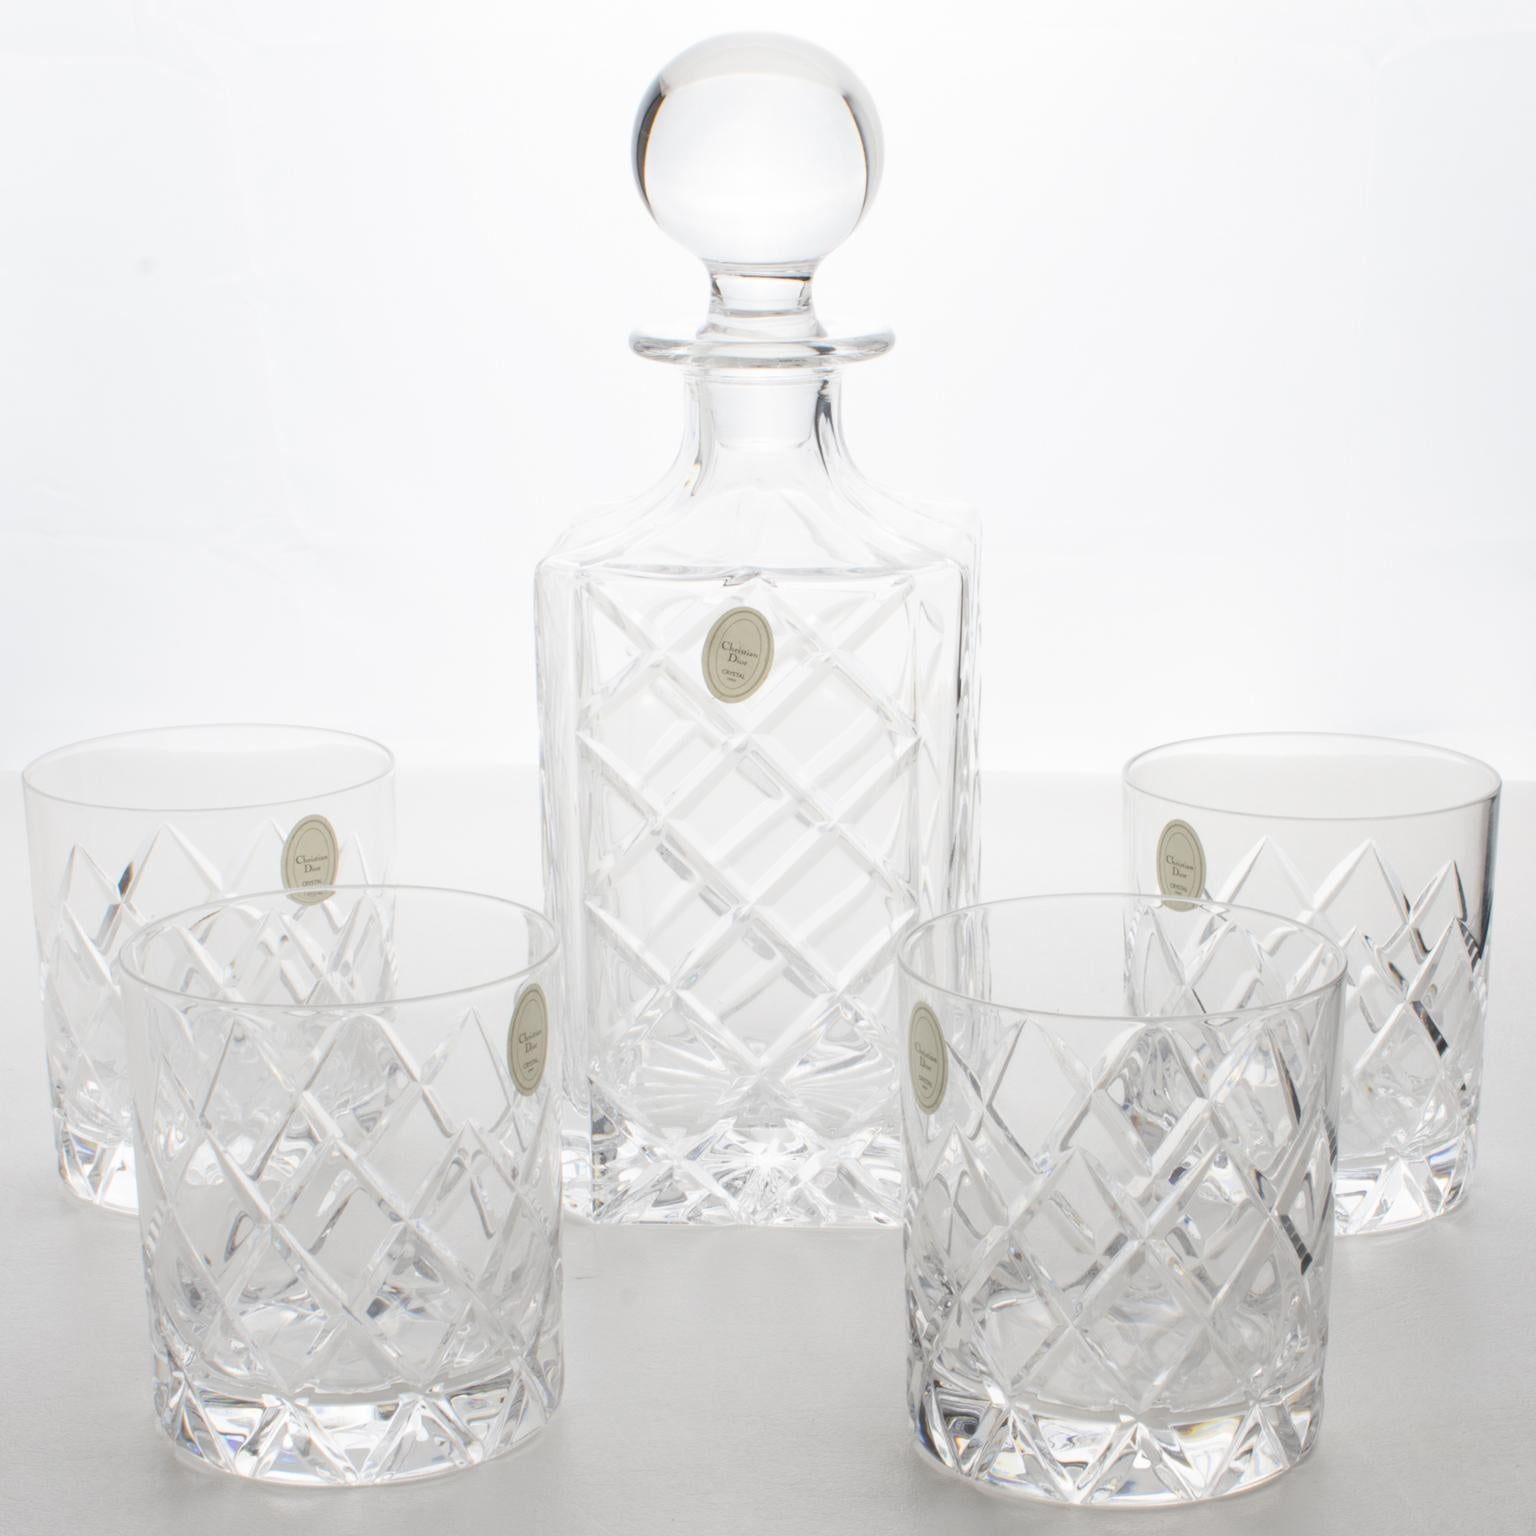 Christian Dior Crystal Decanter and Glasses Set, 5 pieces in Original Box, 1980s 4